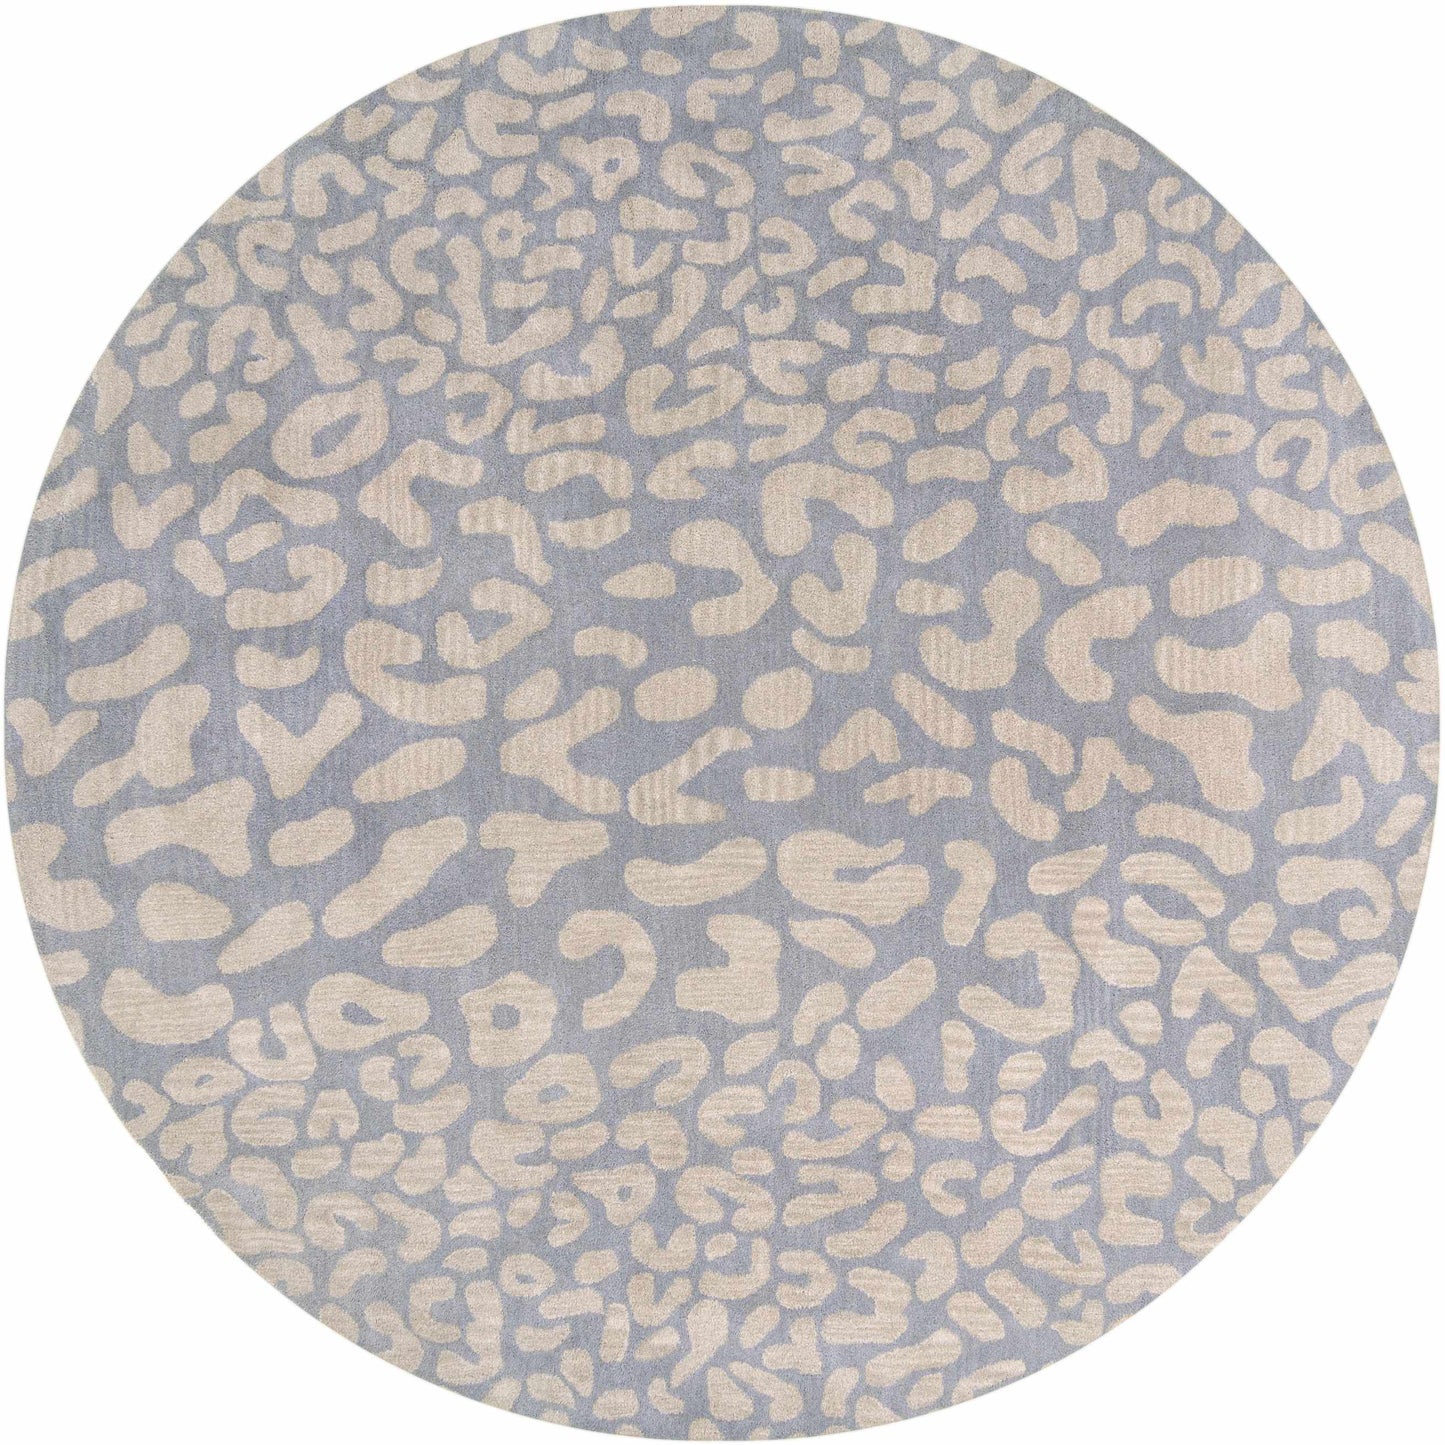 Boutique Rugs Rugs 4' Round Curwensville Leopard Print Area Rug